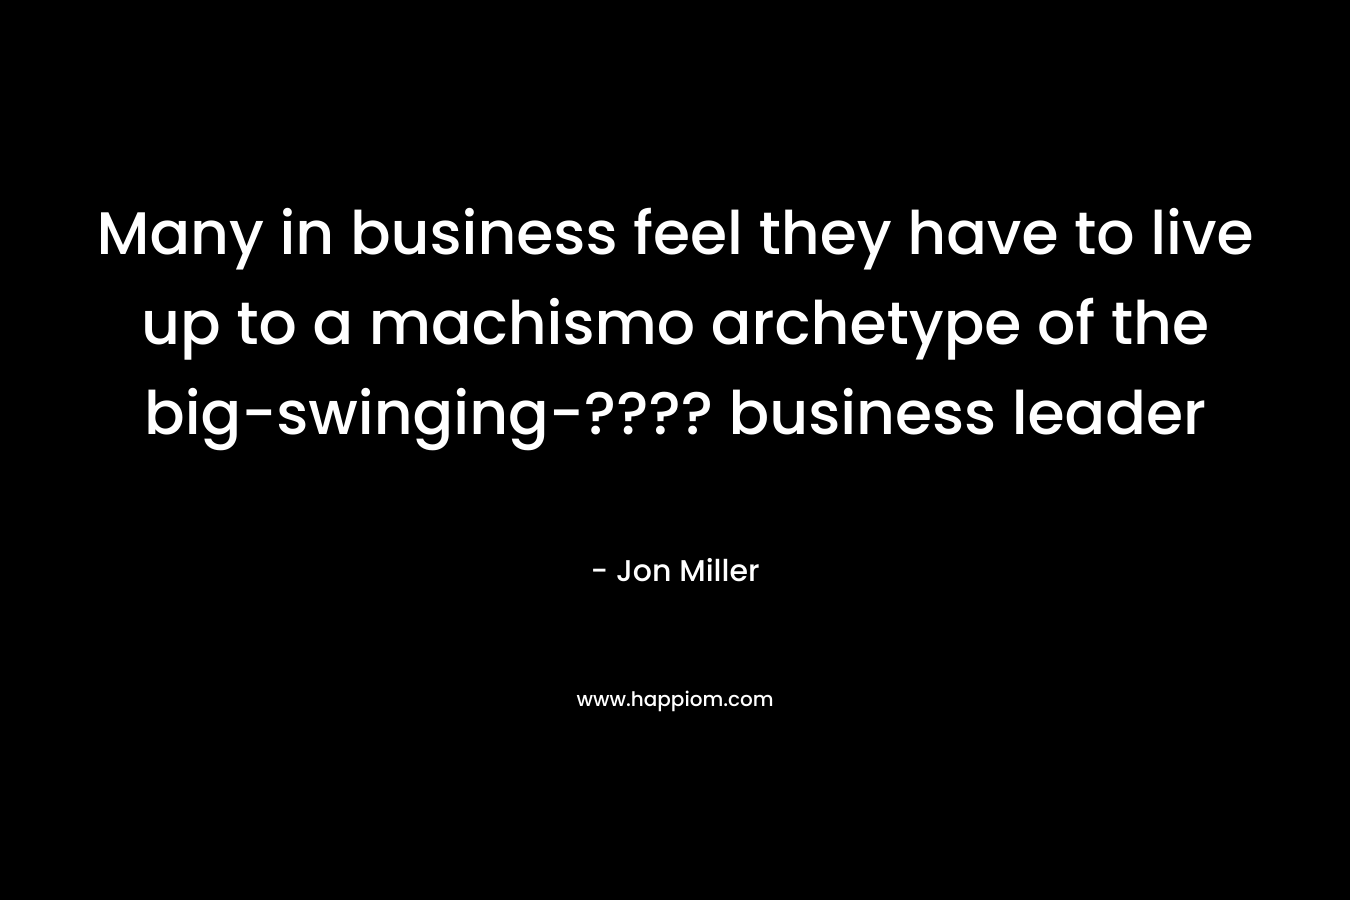 Many in business feel they have to live up to a machismo archetype of the big-swinging-???? business leader – Jon Miller